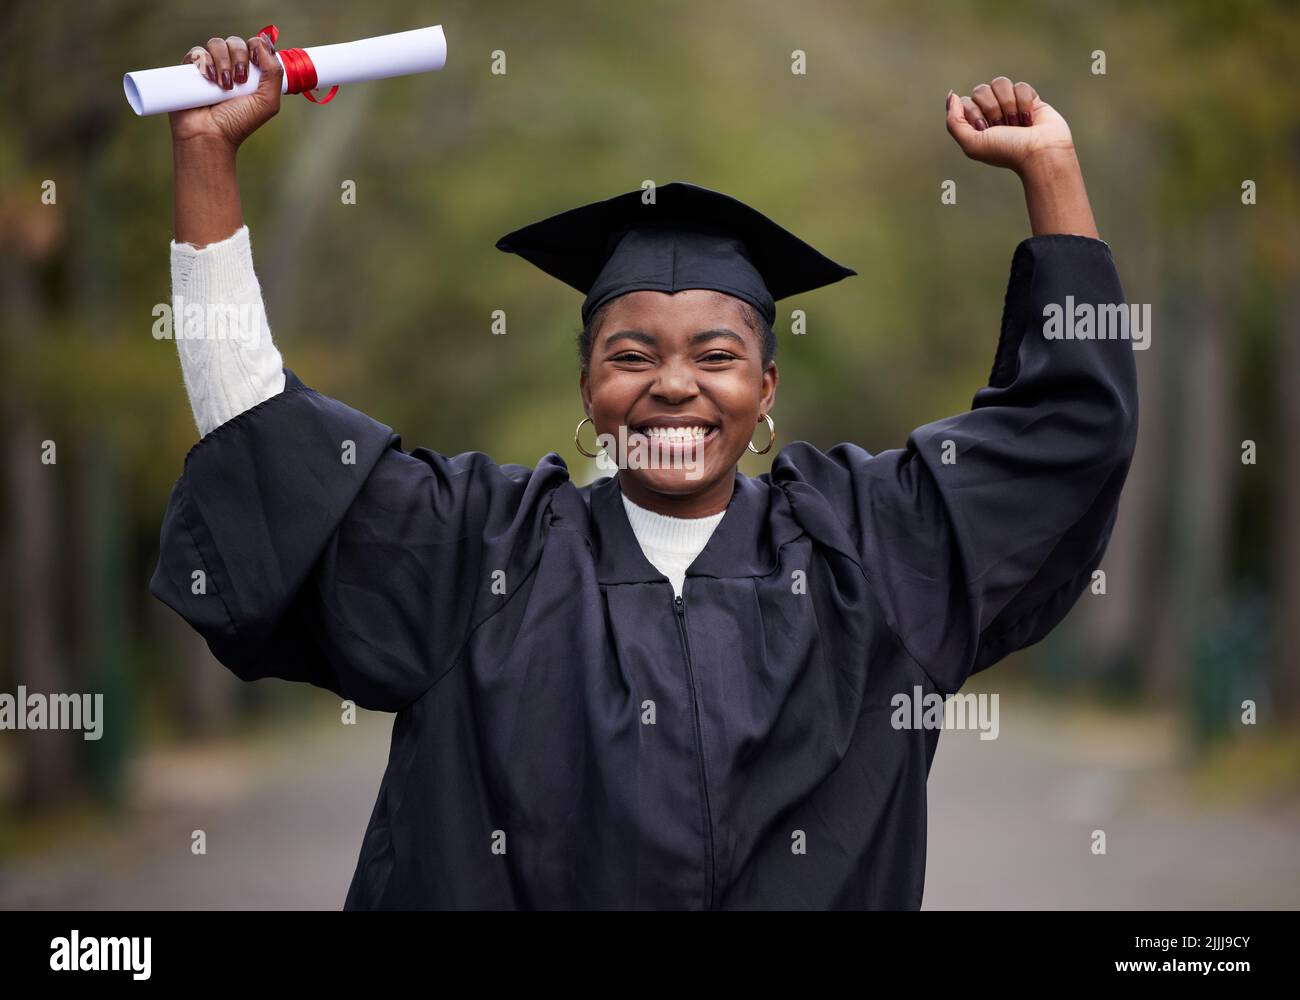 This is proudest moment of my life. Portrait of a young woman cheering on graduation day. Stock Photo